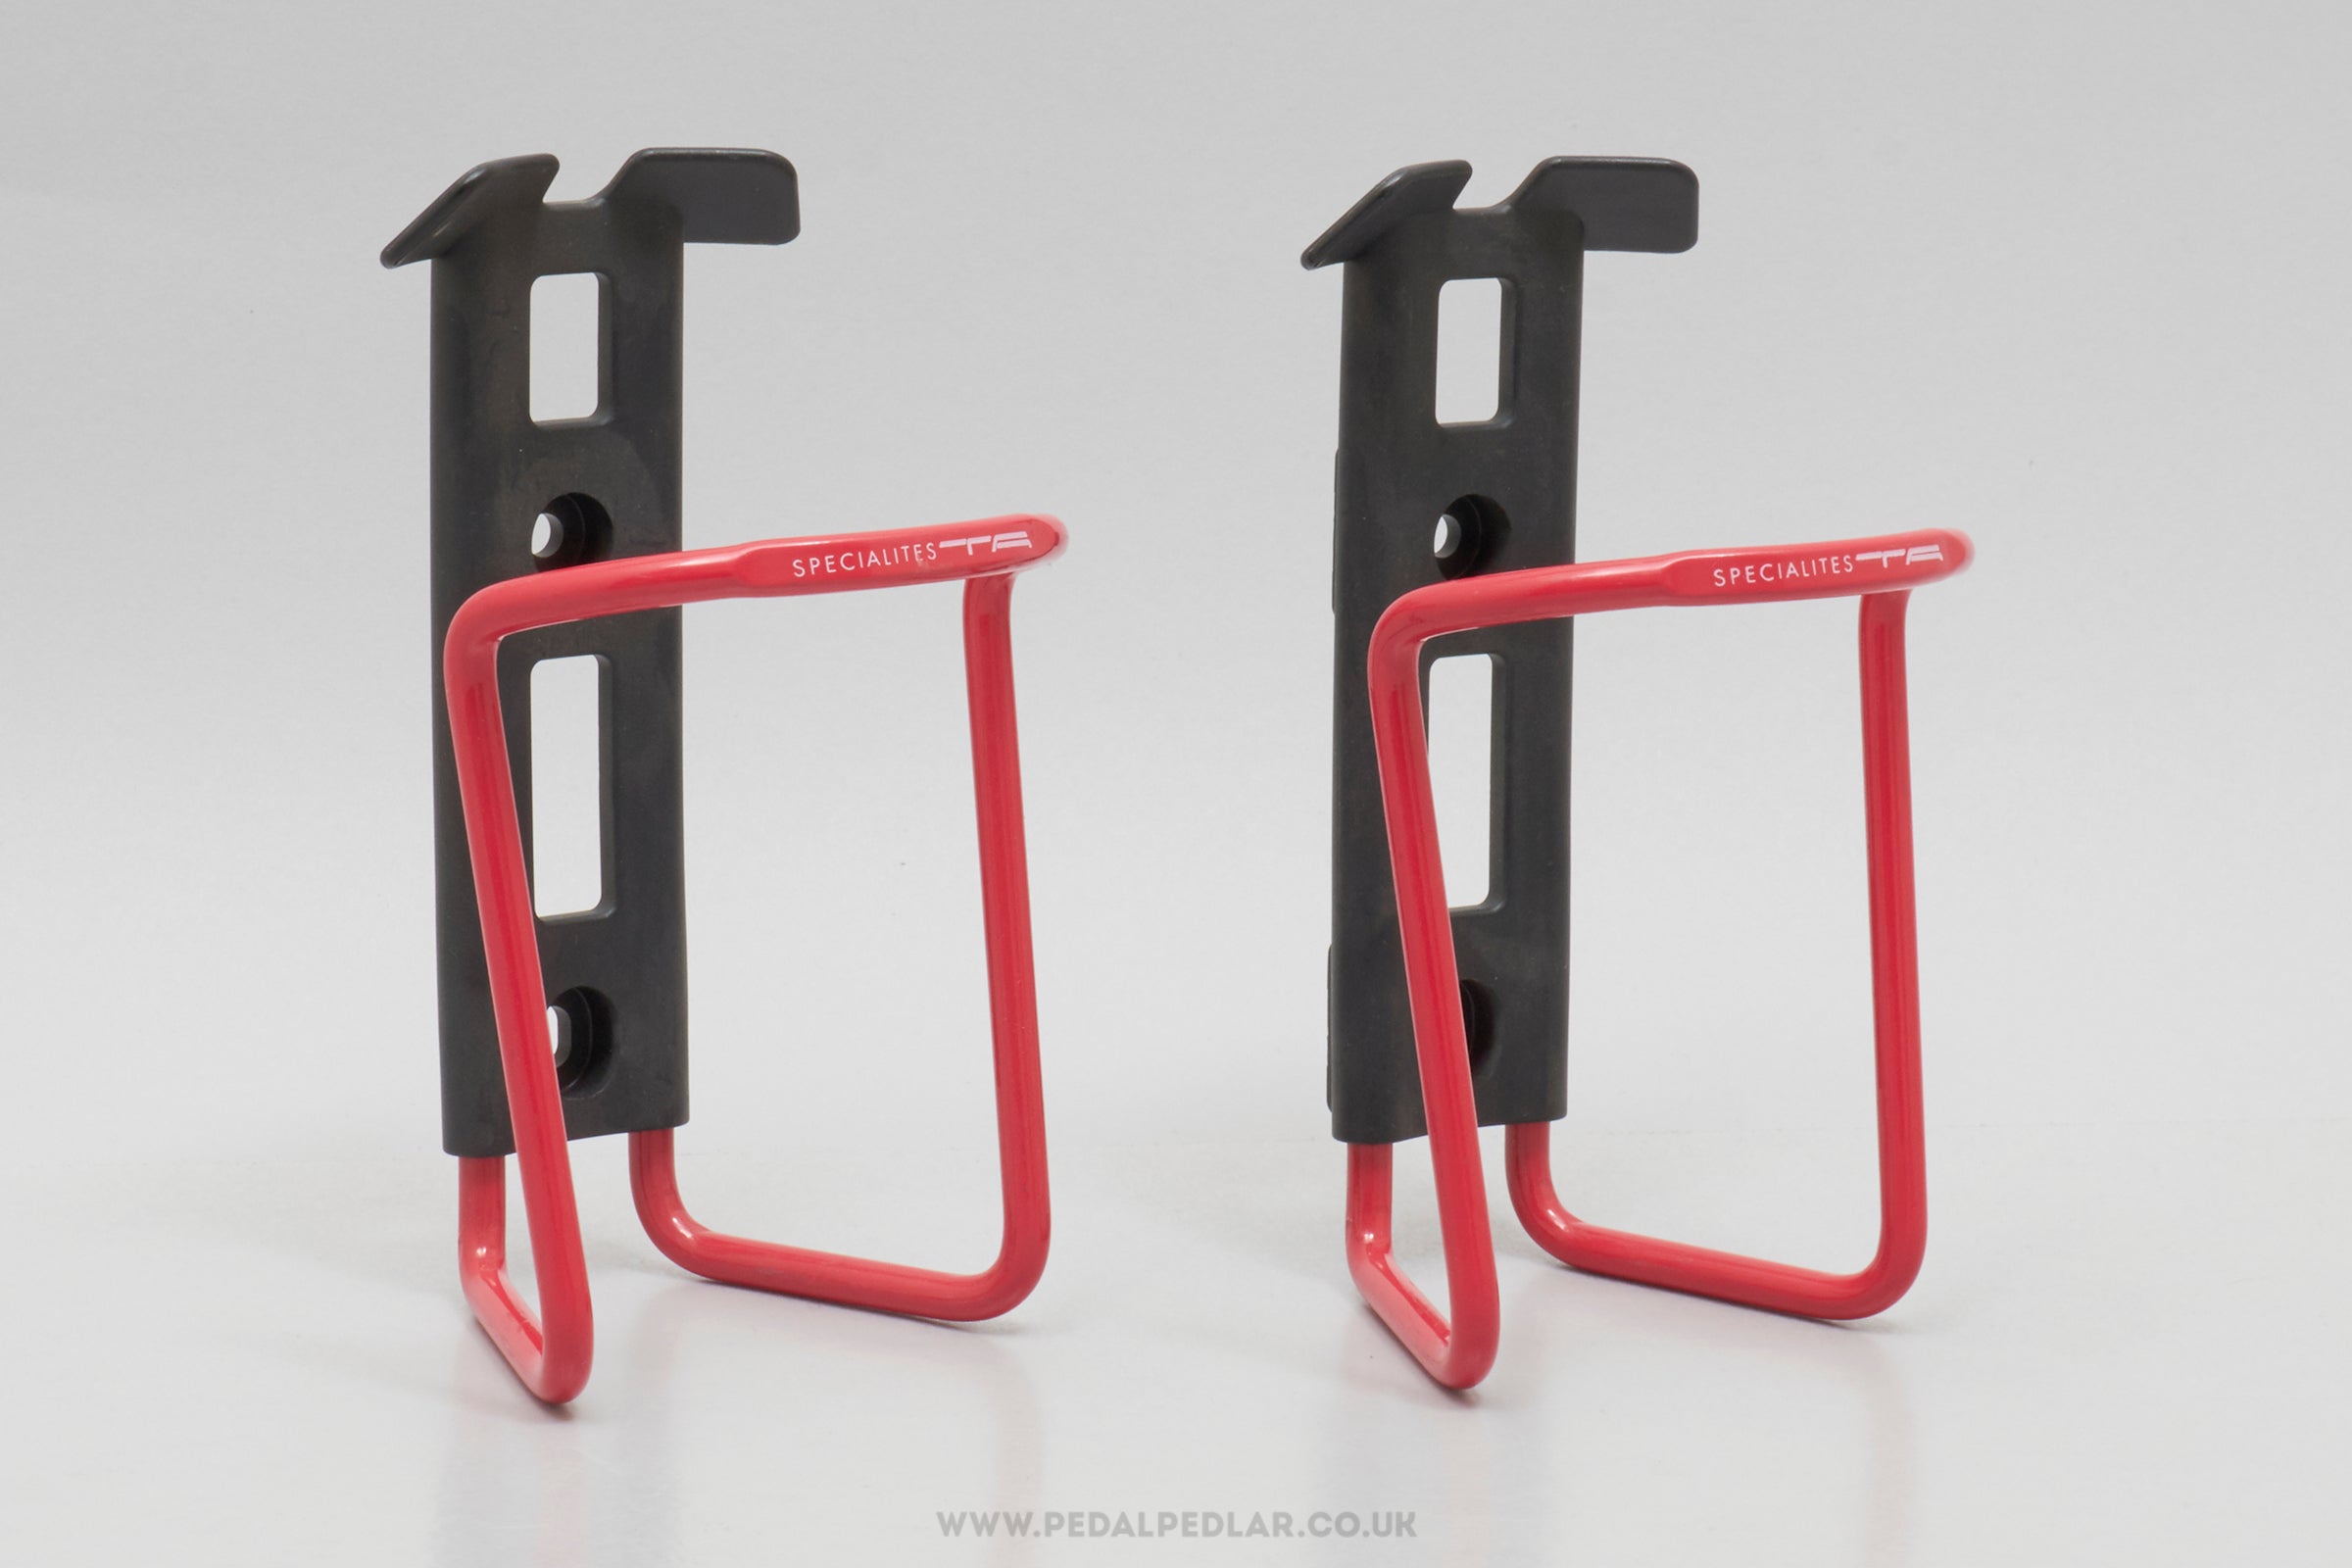 Specialites T.A. Sierra NOS Classic Red Bottle Cages - Pedal Pedlar - Buy New Old Stock Cycle Accessories